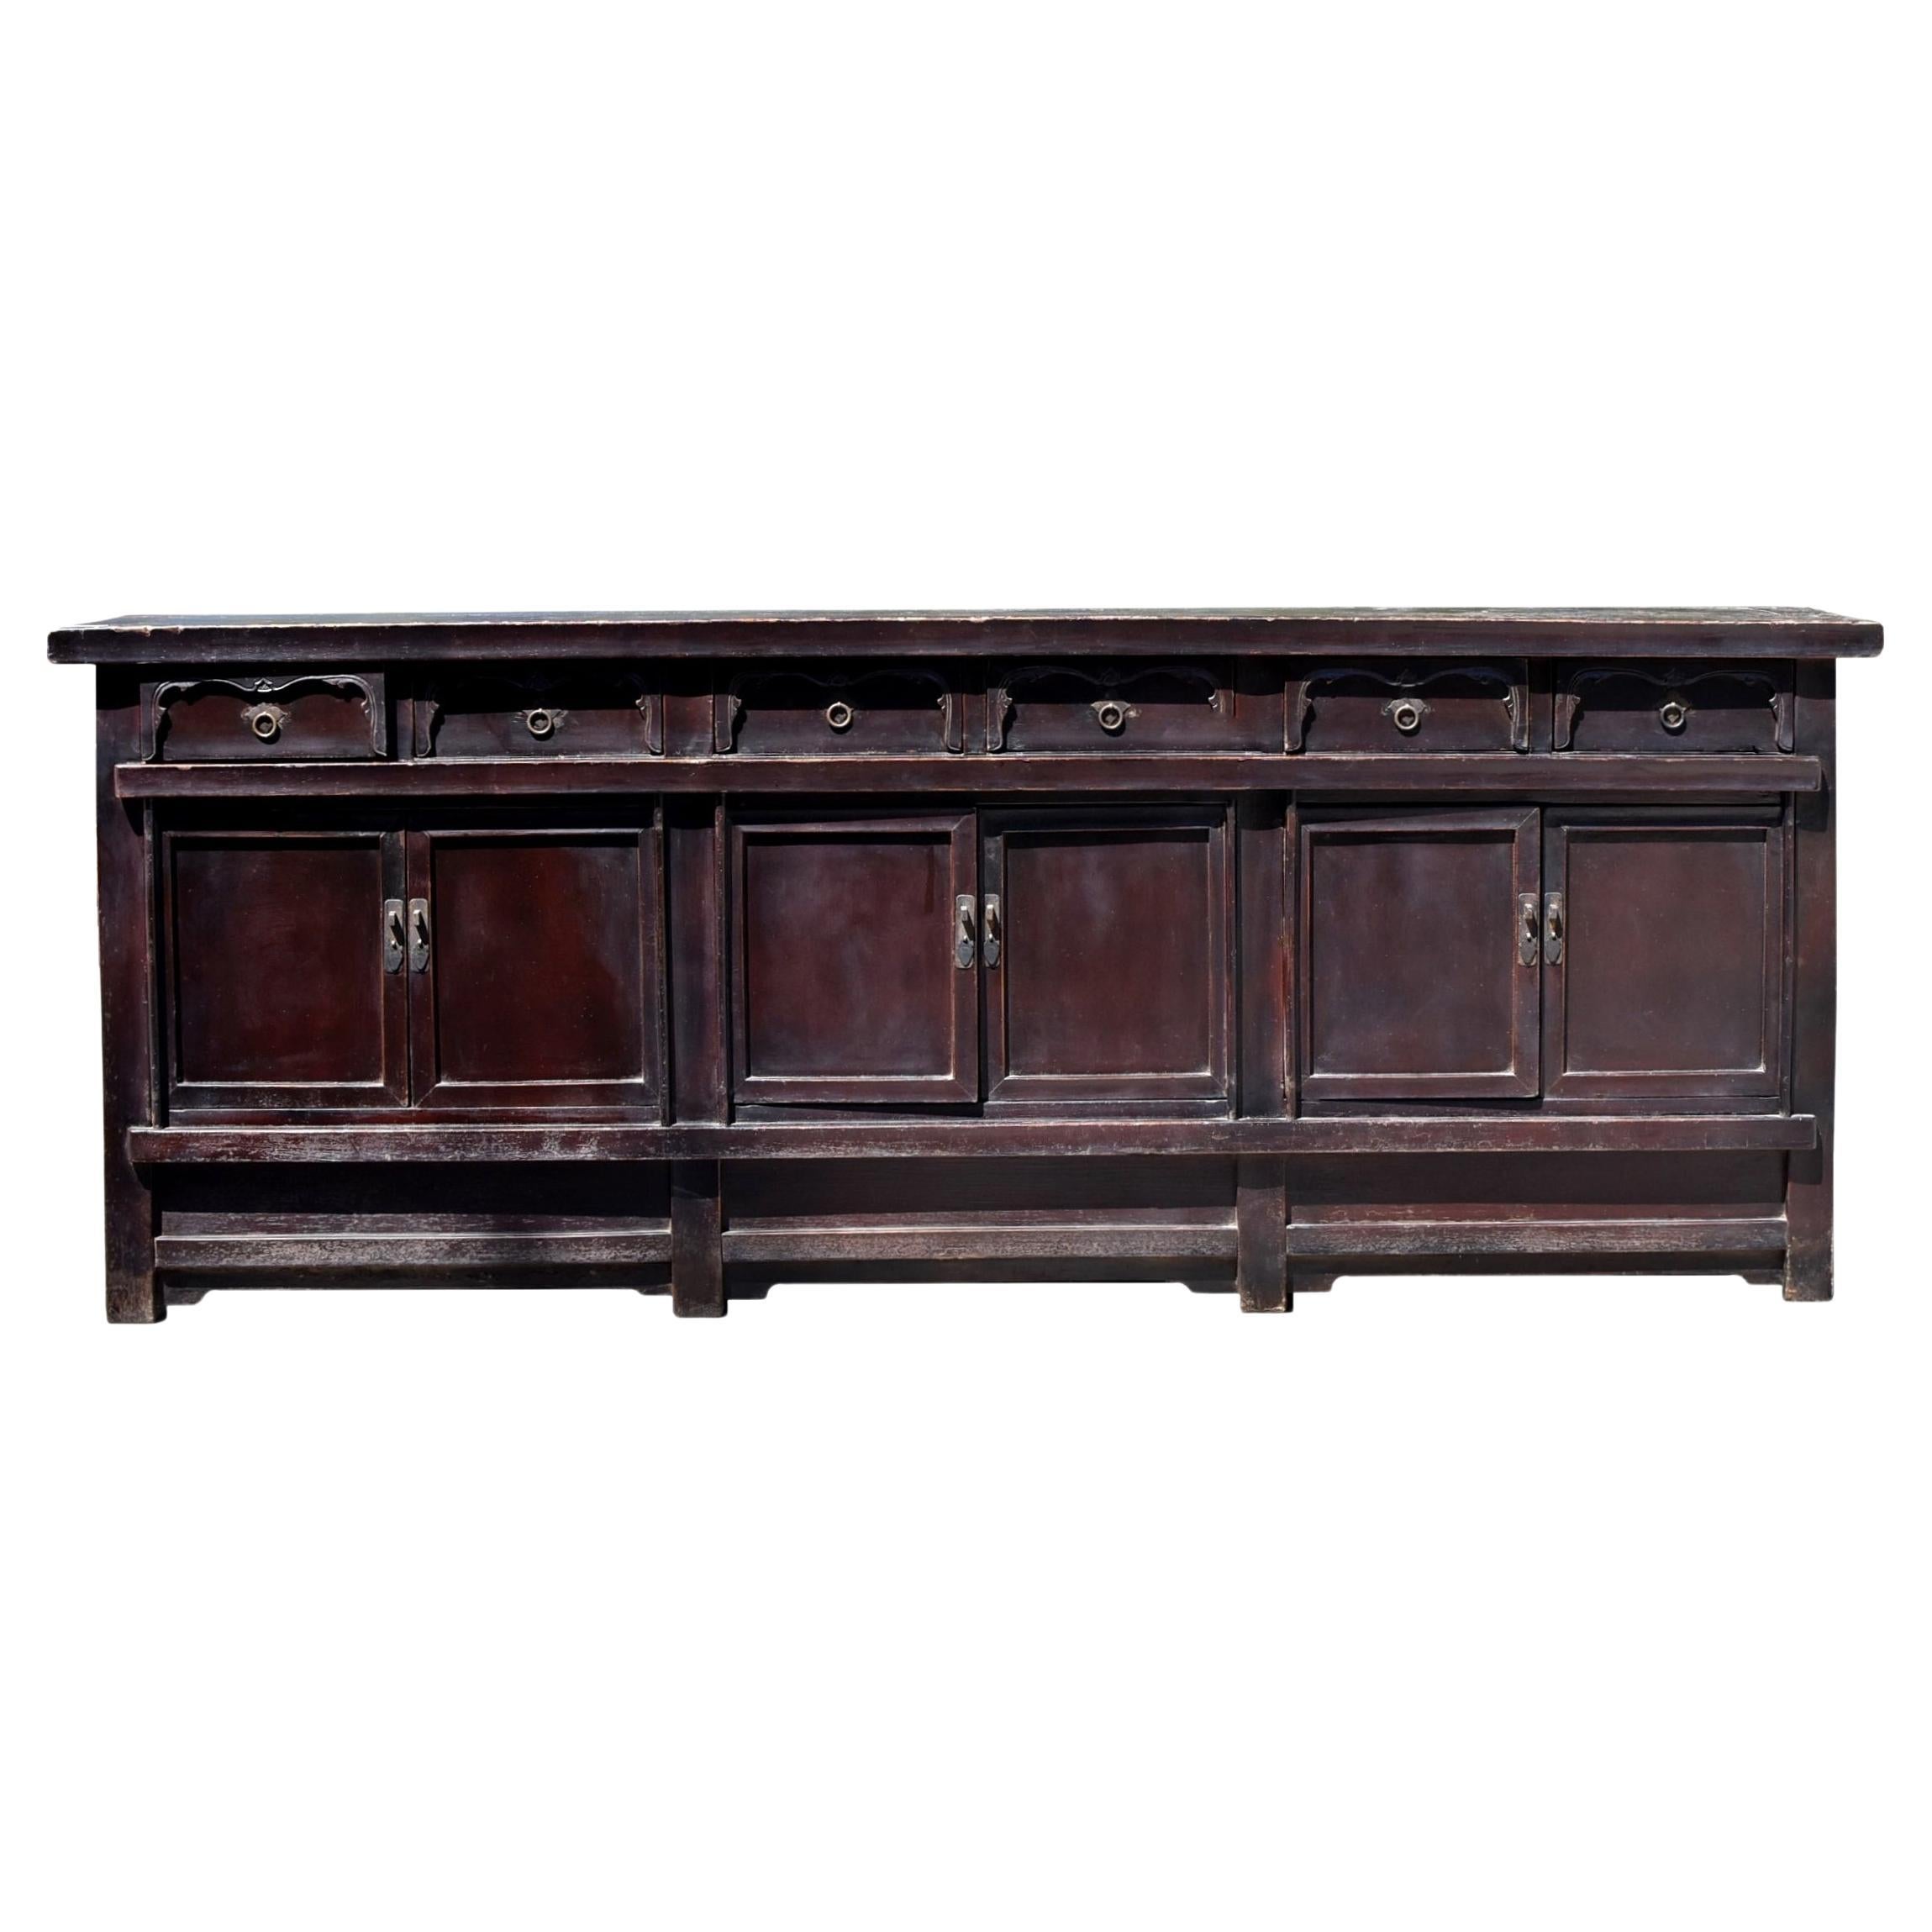 Monumental 19th Century Chinese Black Sideboard 9'8" 